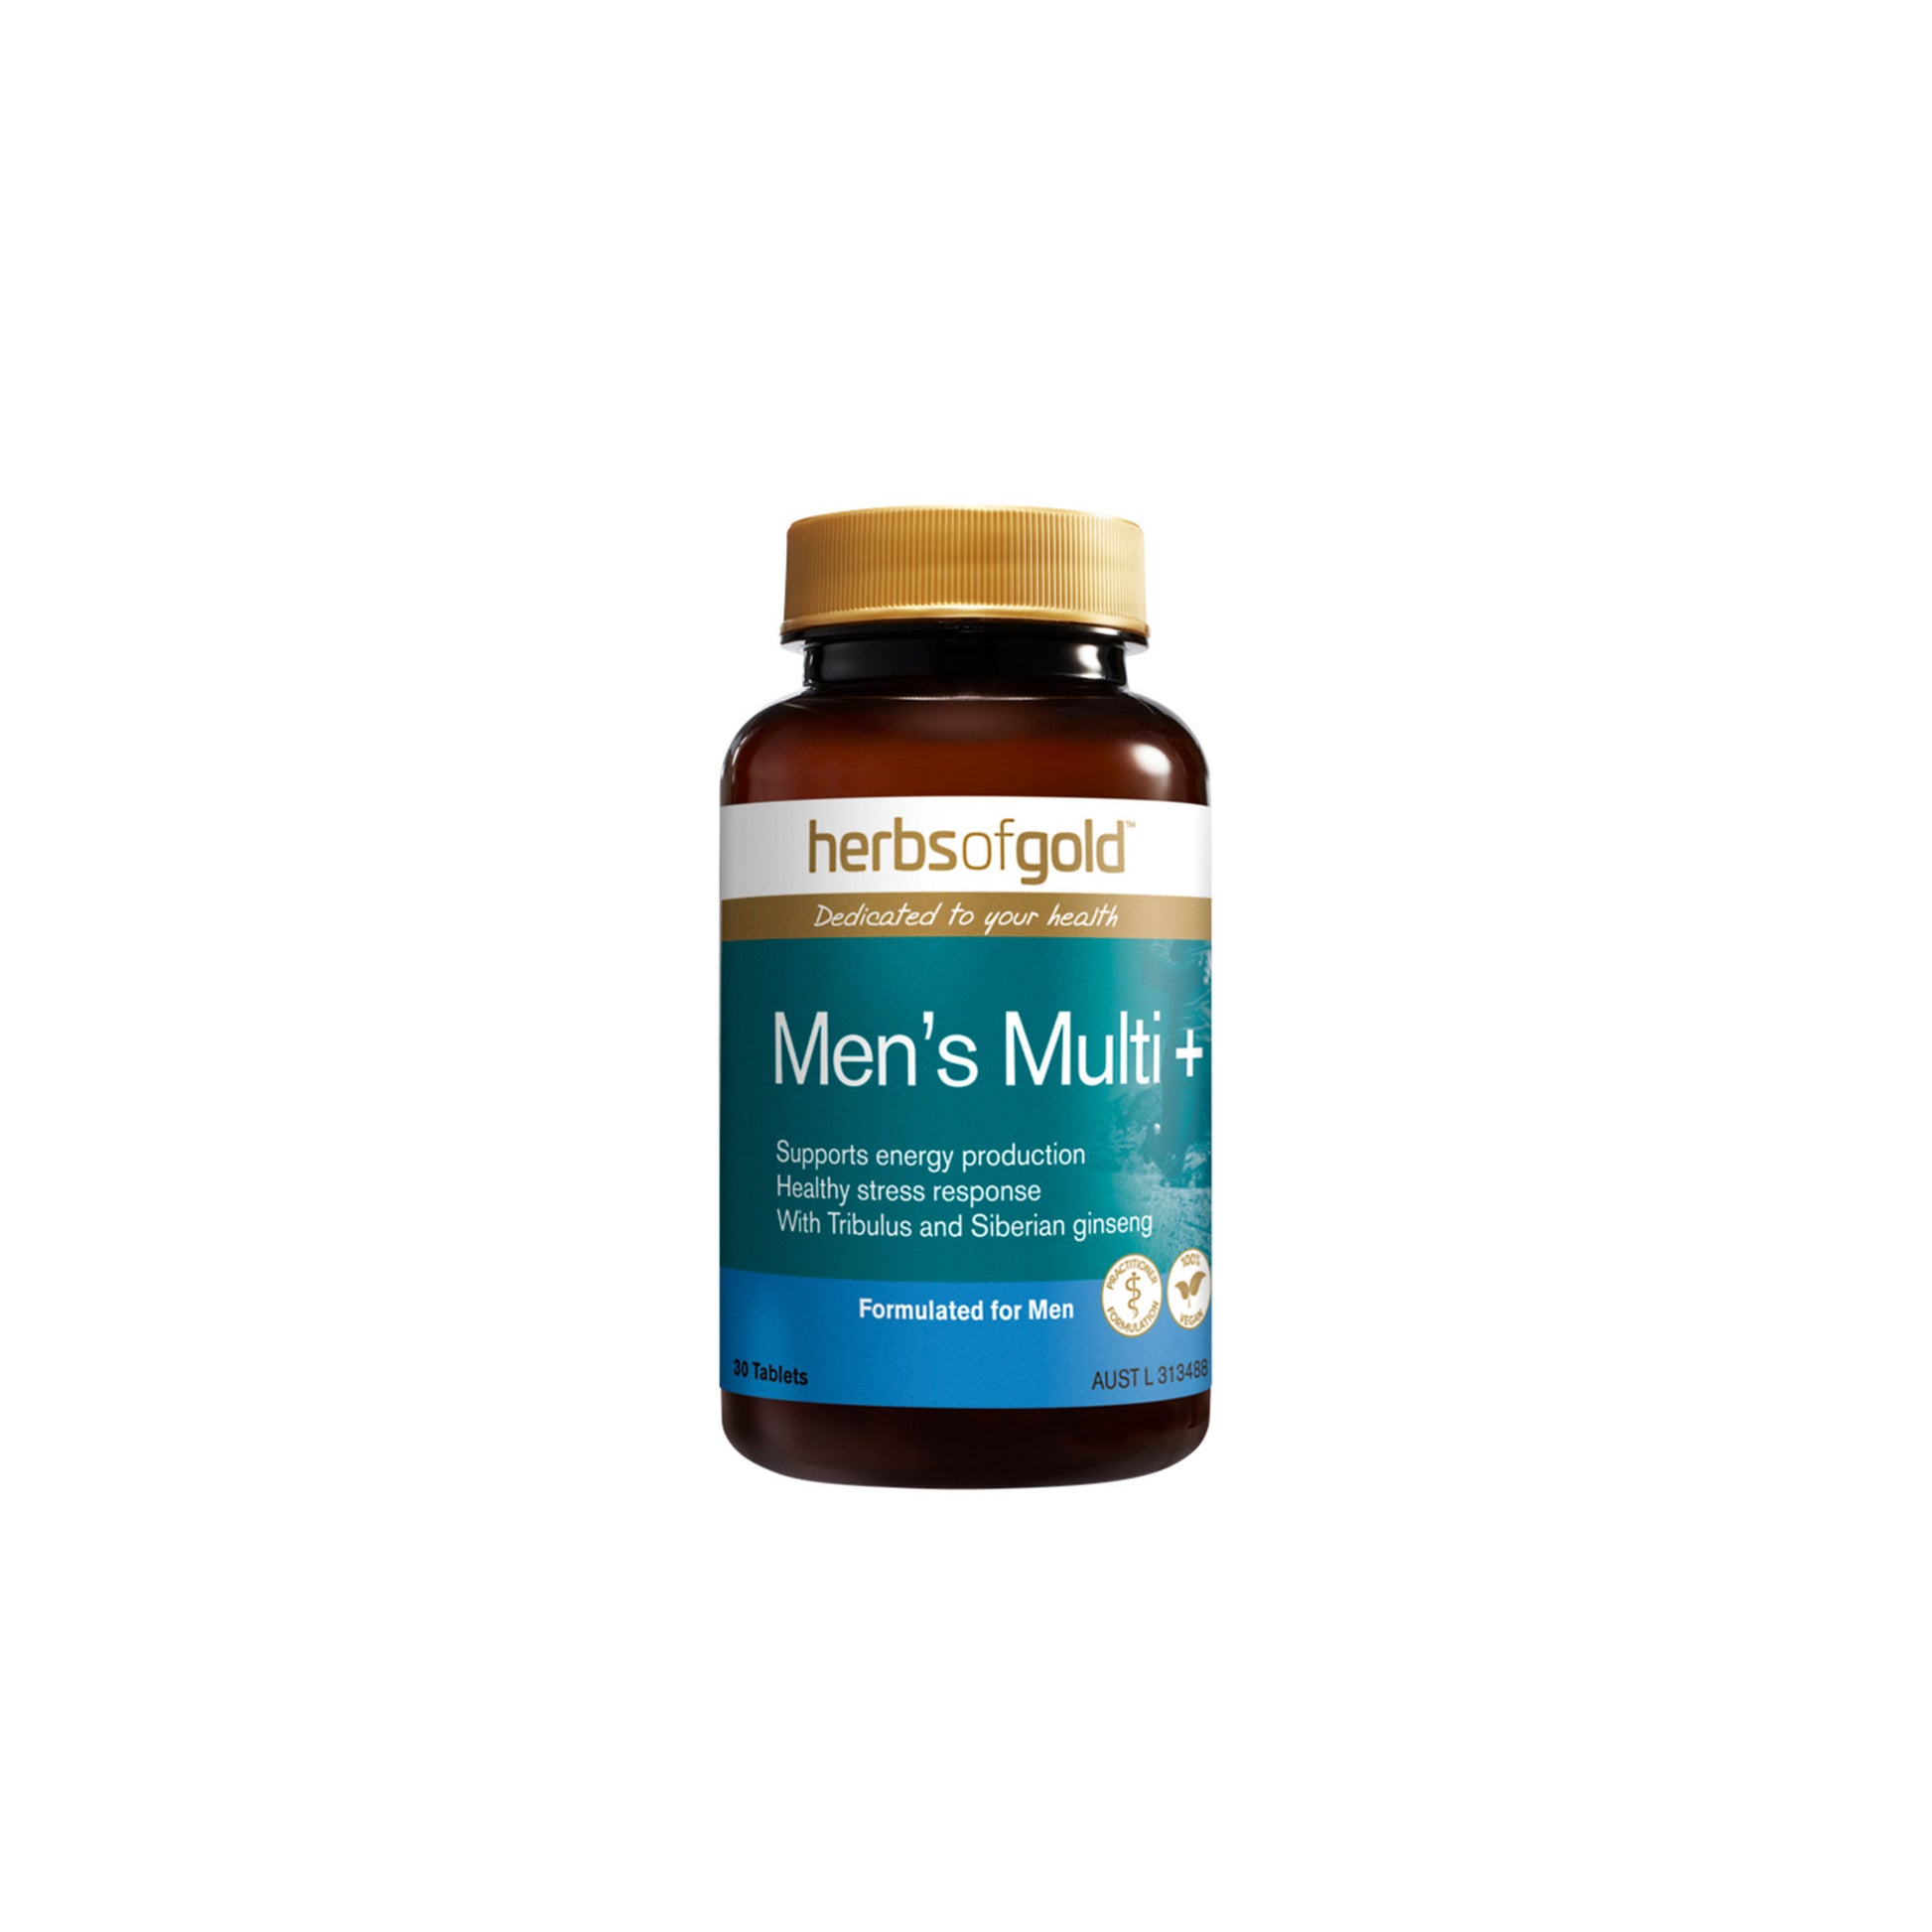 Men's Multi Plus - 30 Tablets - Herbs of Gold | MLC Space